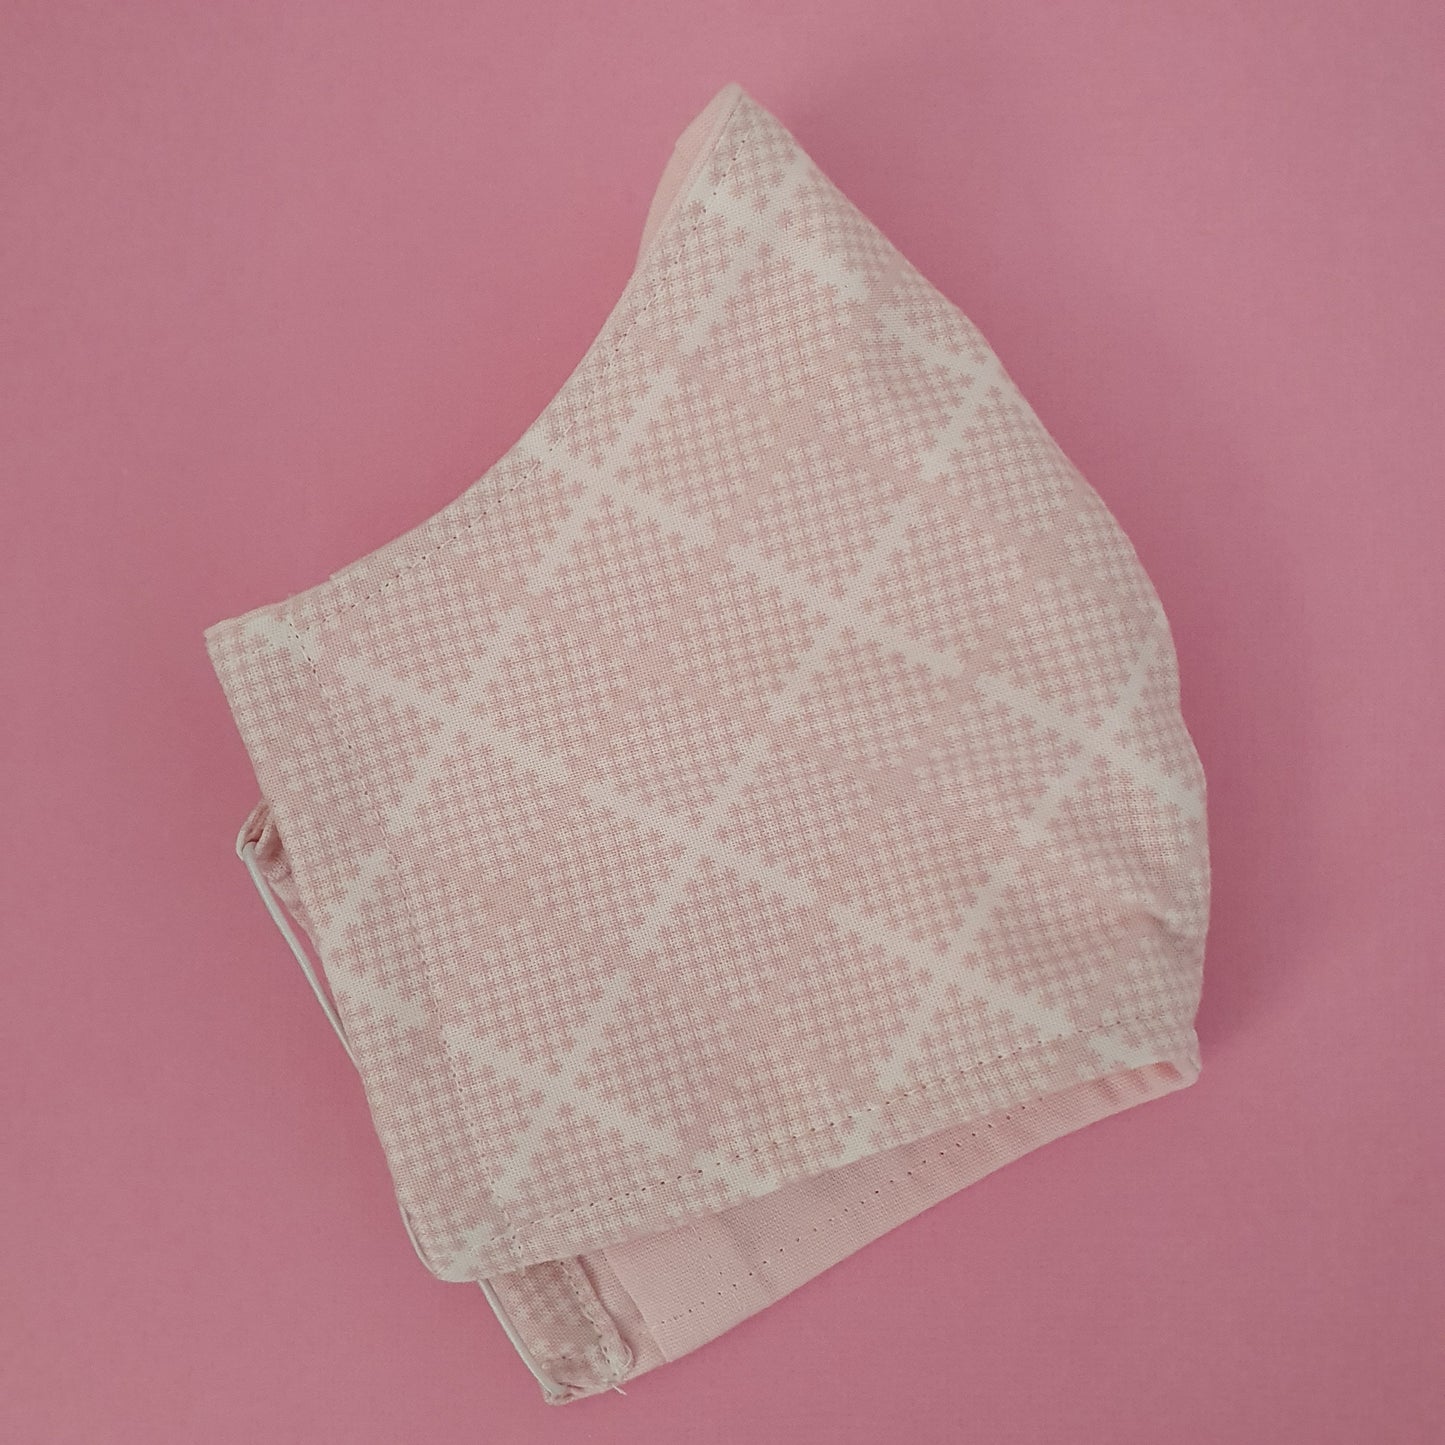 LADIES / TEENS FACE MASK - Reusable,  Washable,  3 Layers 100% Cotton (Includes Filter Pocket)